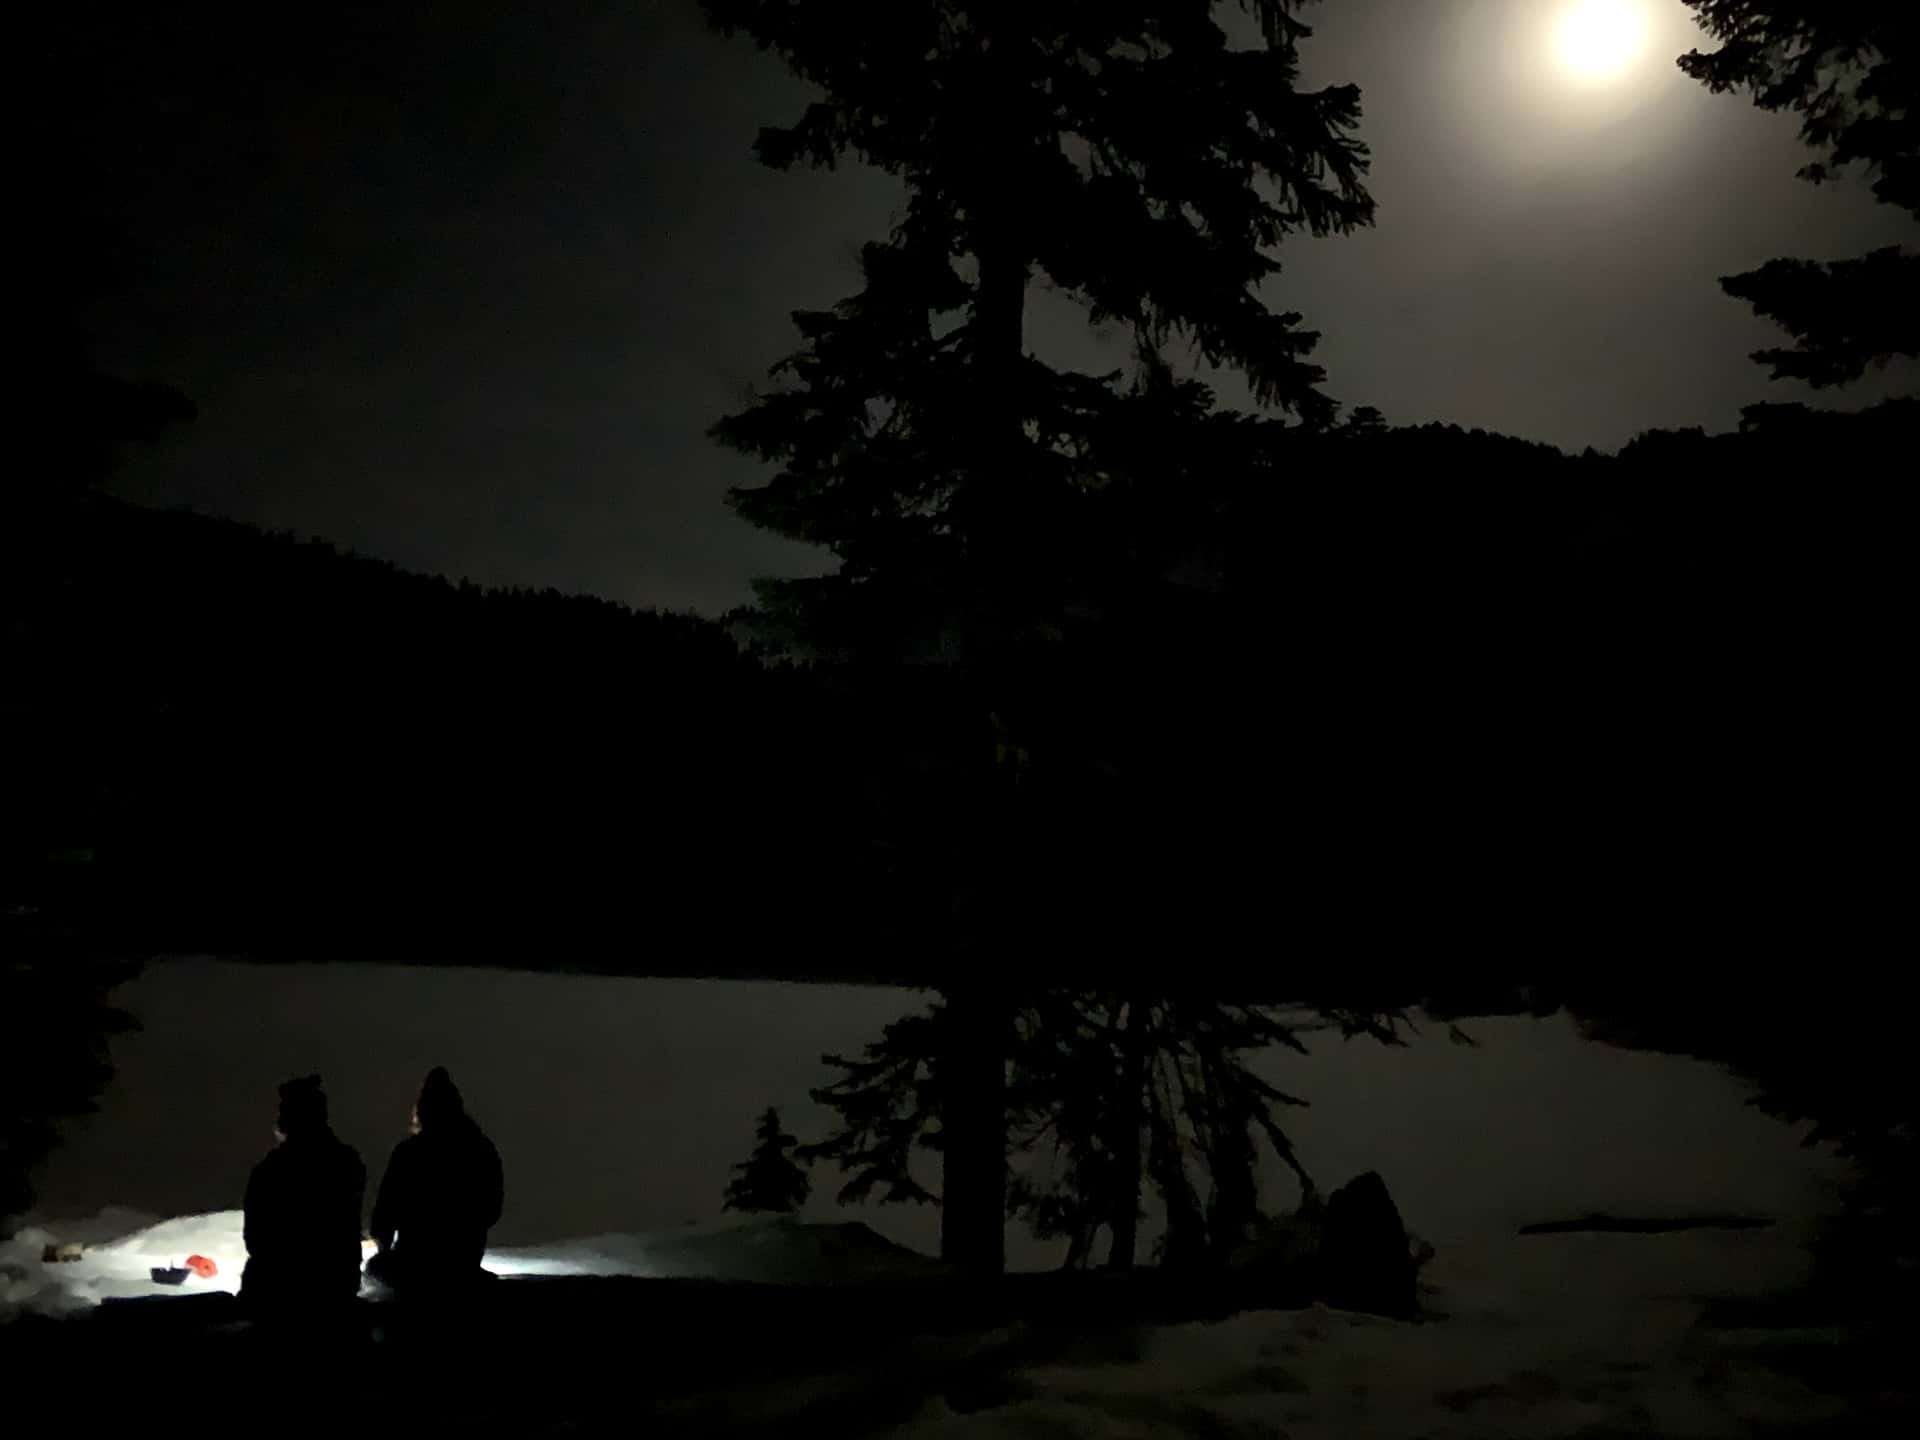 cooking in the snow under a full moon at Olallie Lake